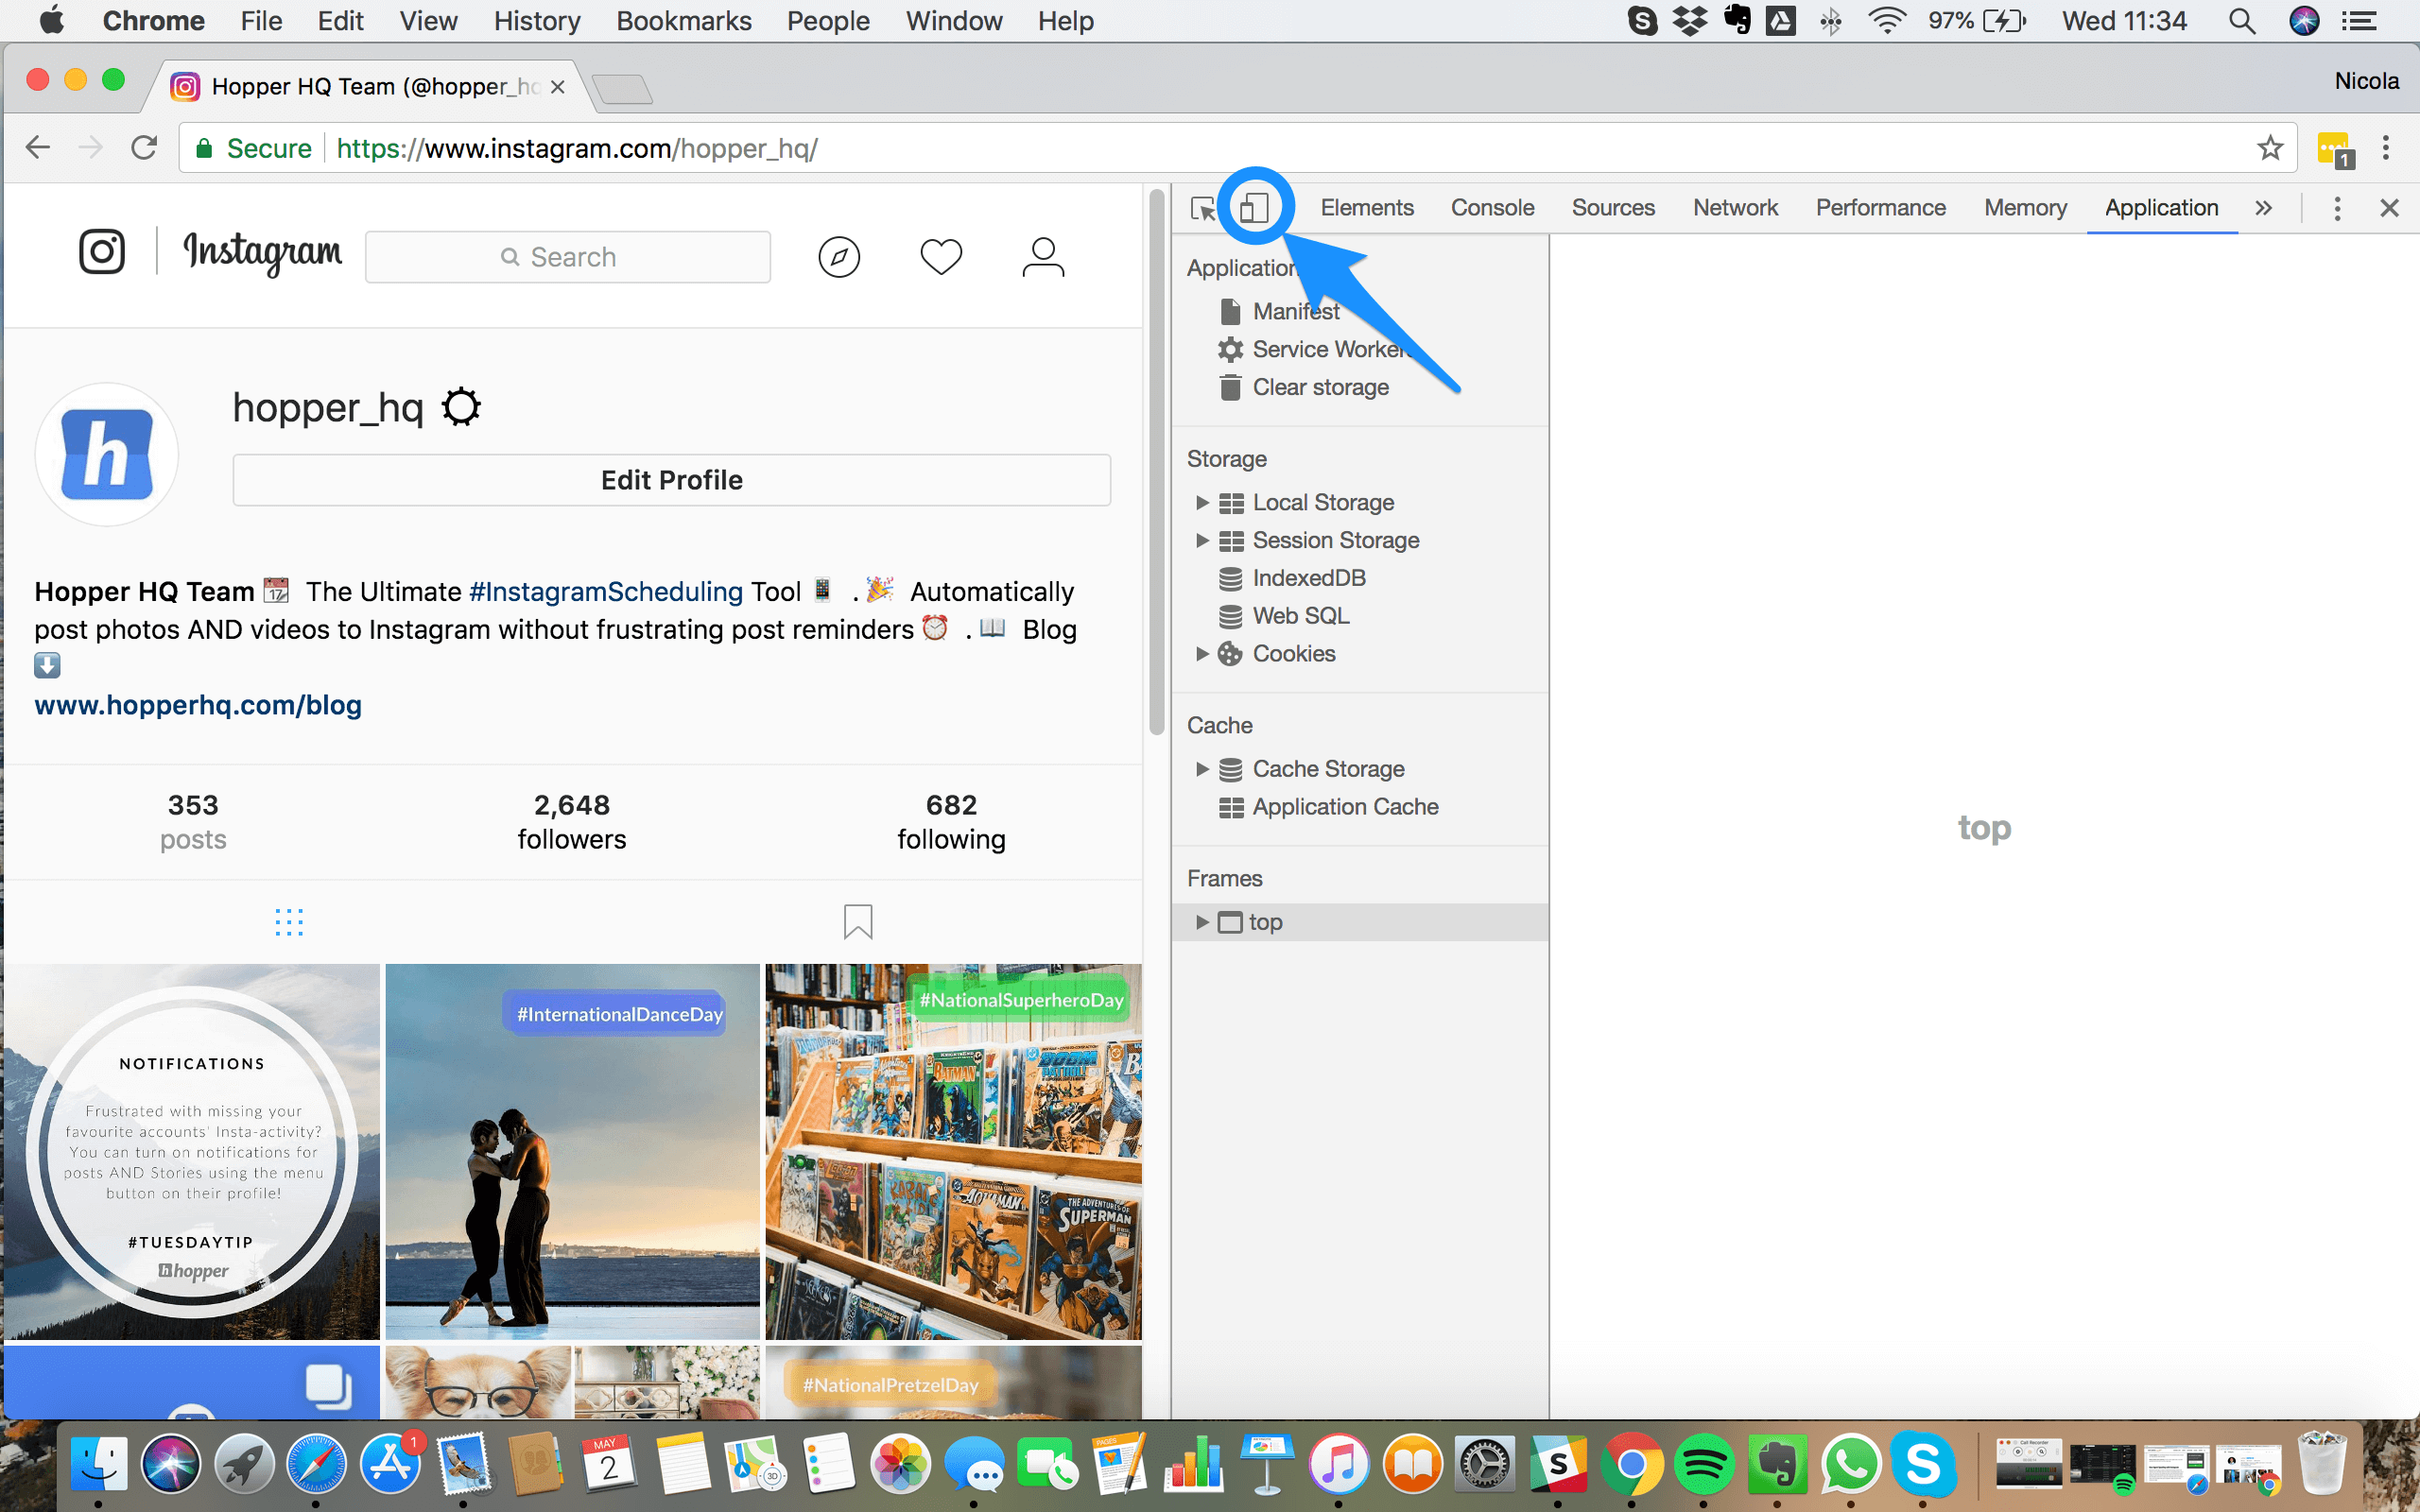 How To Download Entire Site Mac